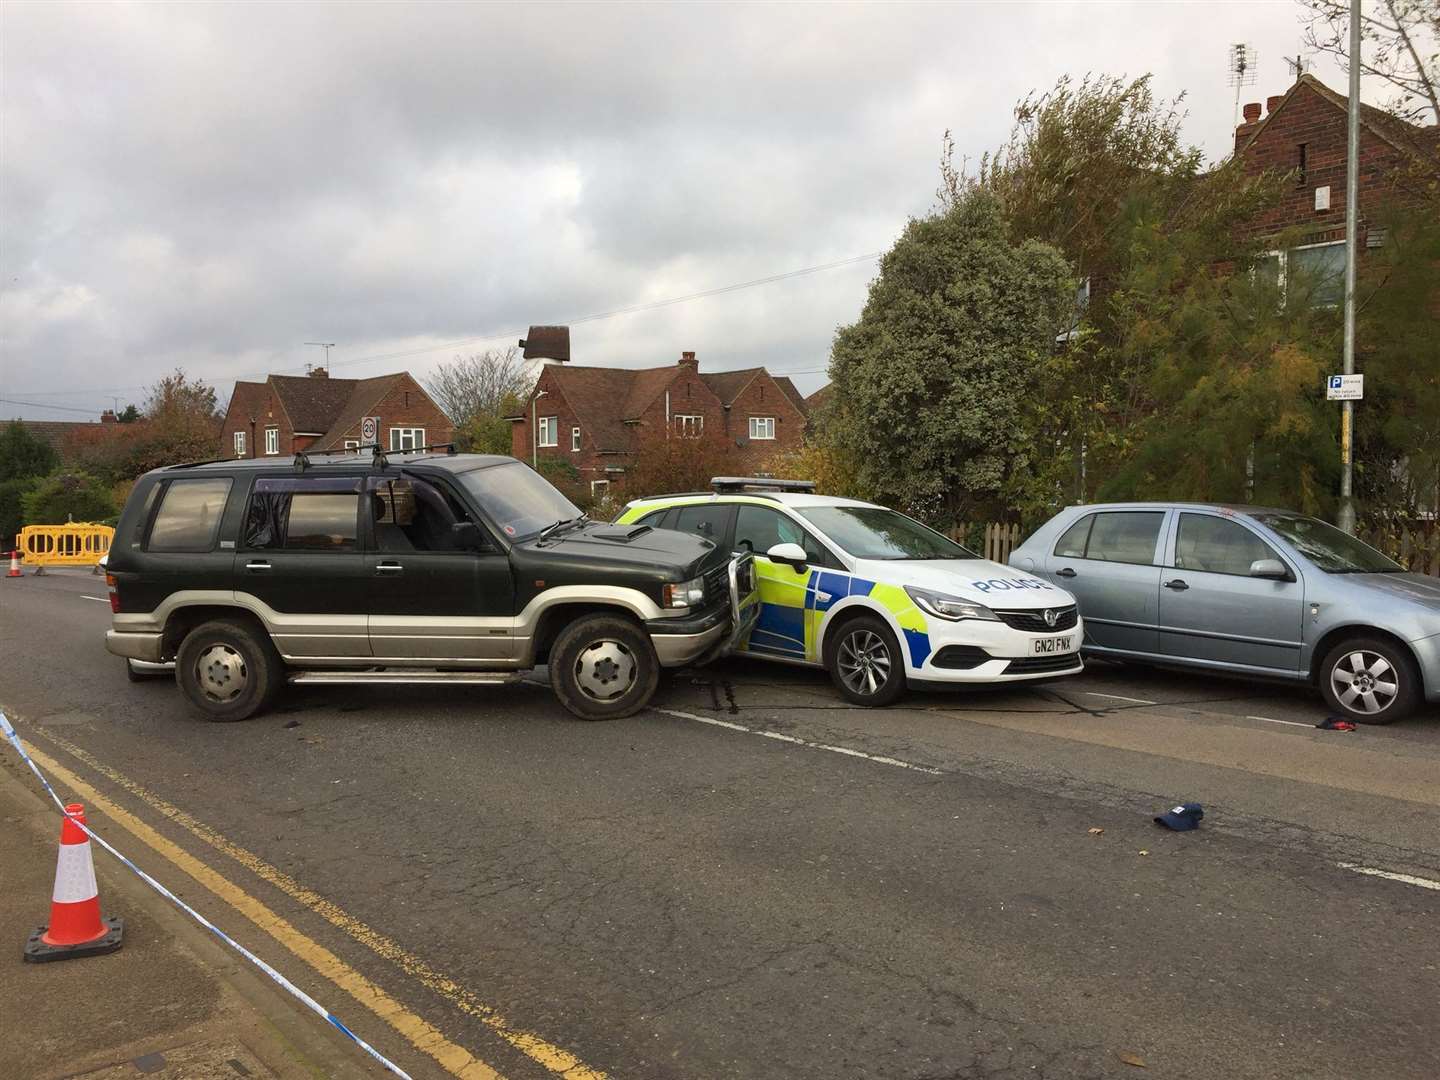 There appears to have been a collision between a 4x4 and a police car